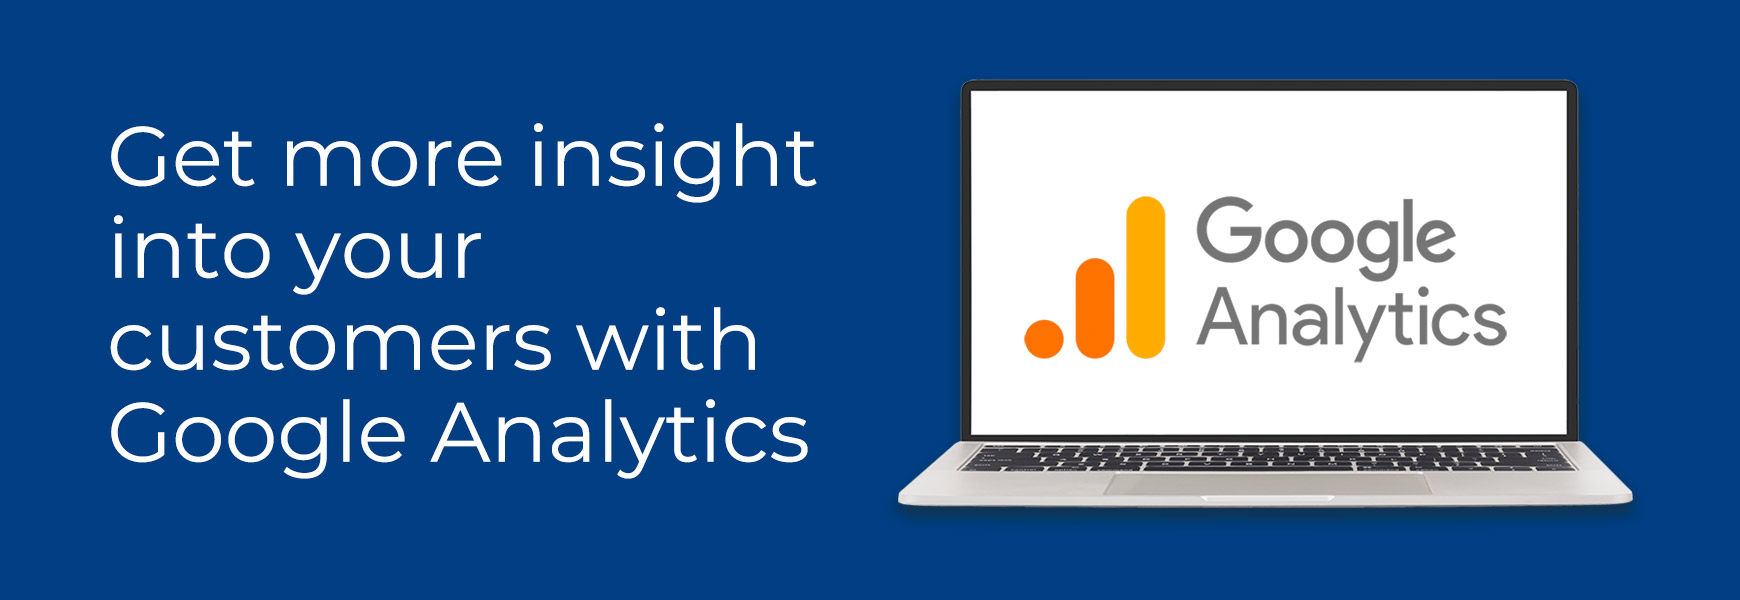 Get more insight into your customers with Google Analytics